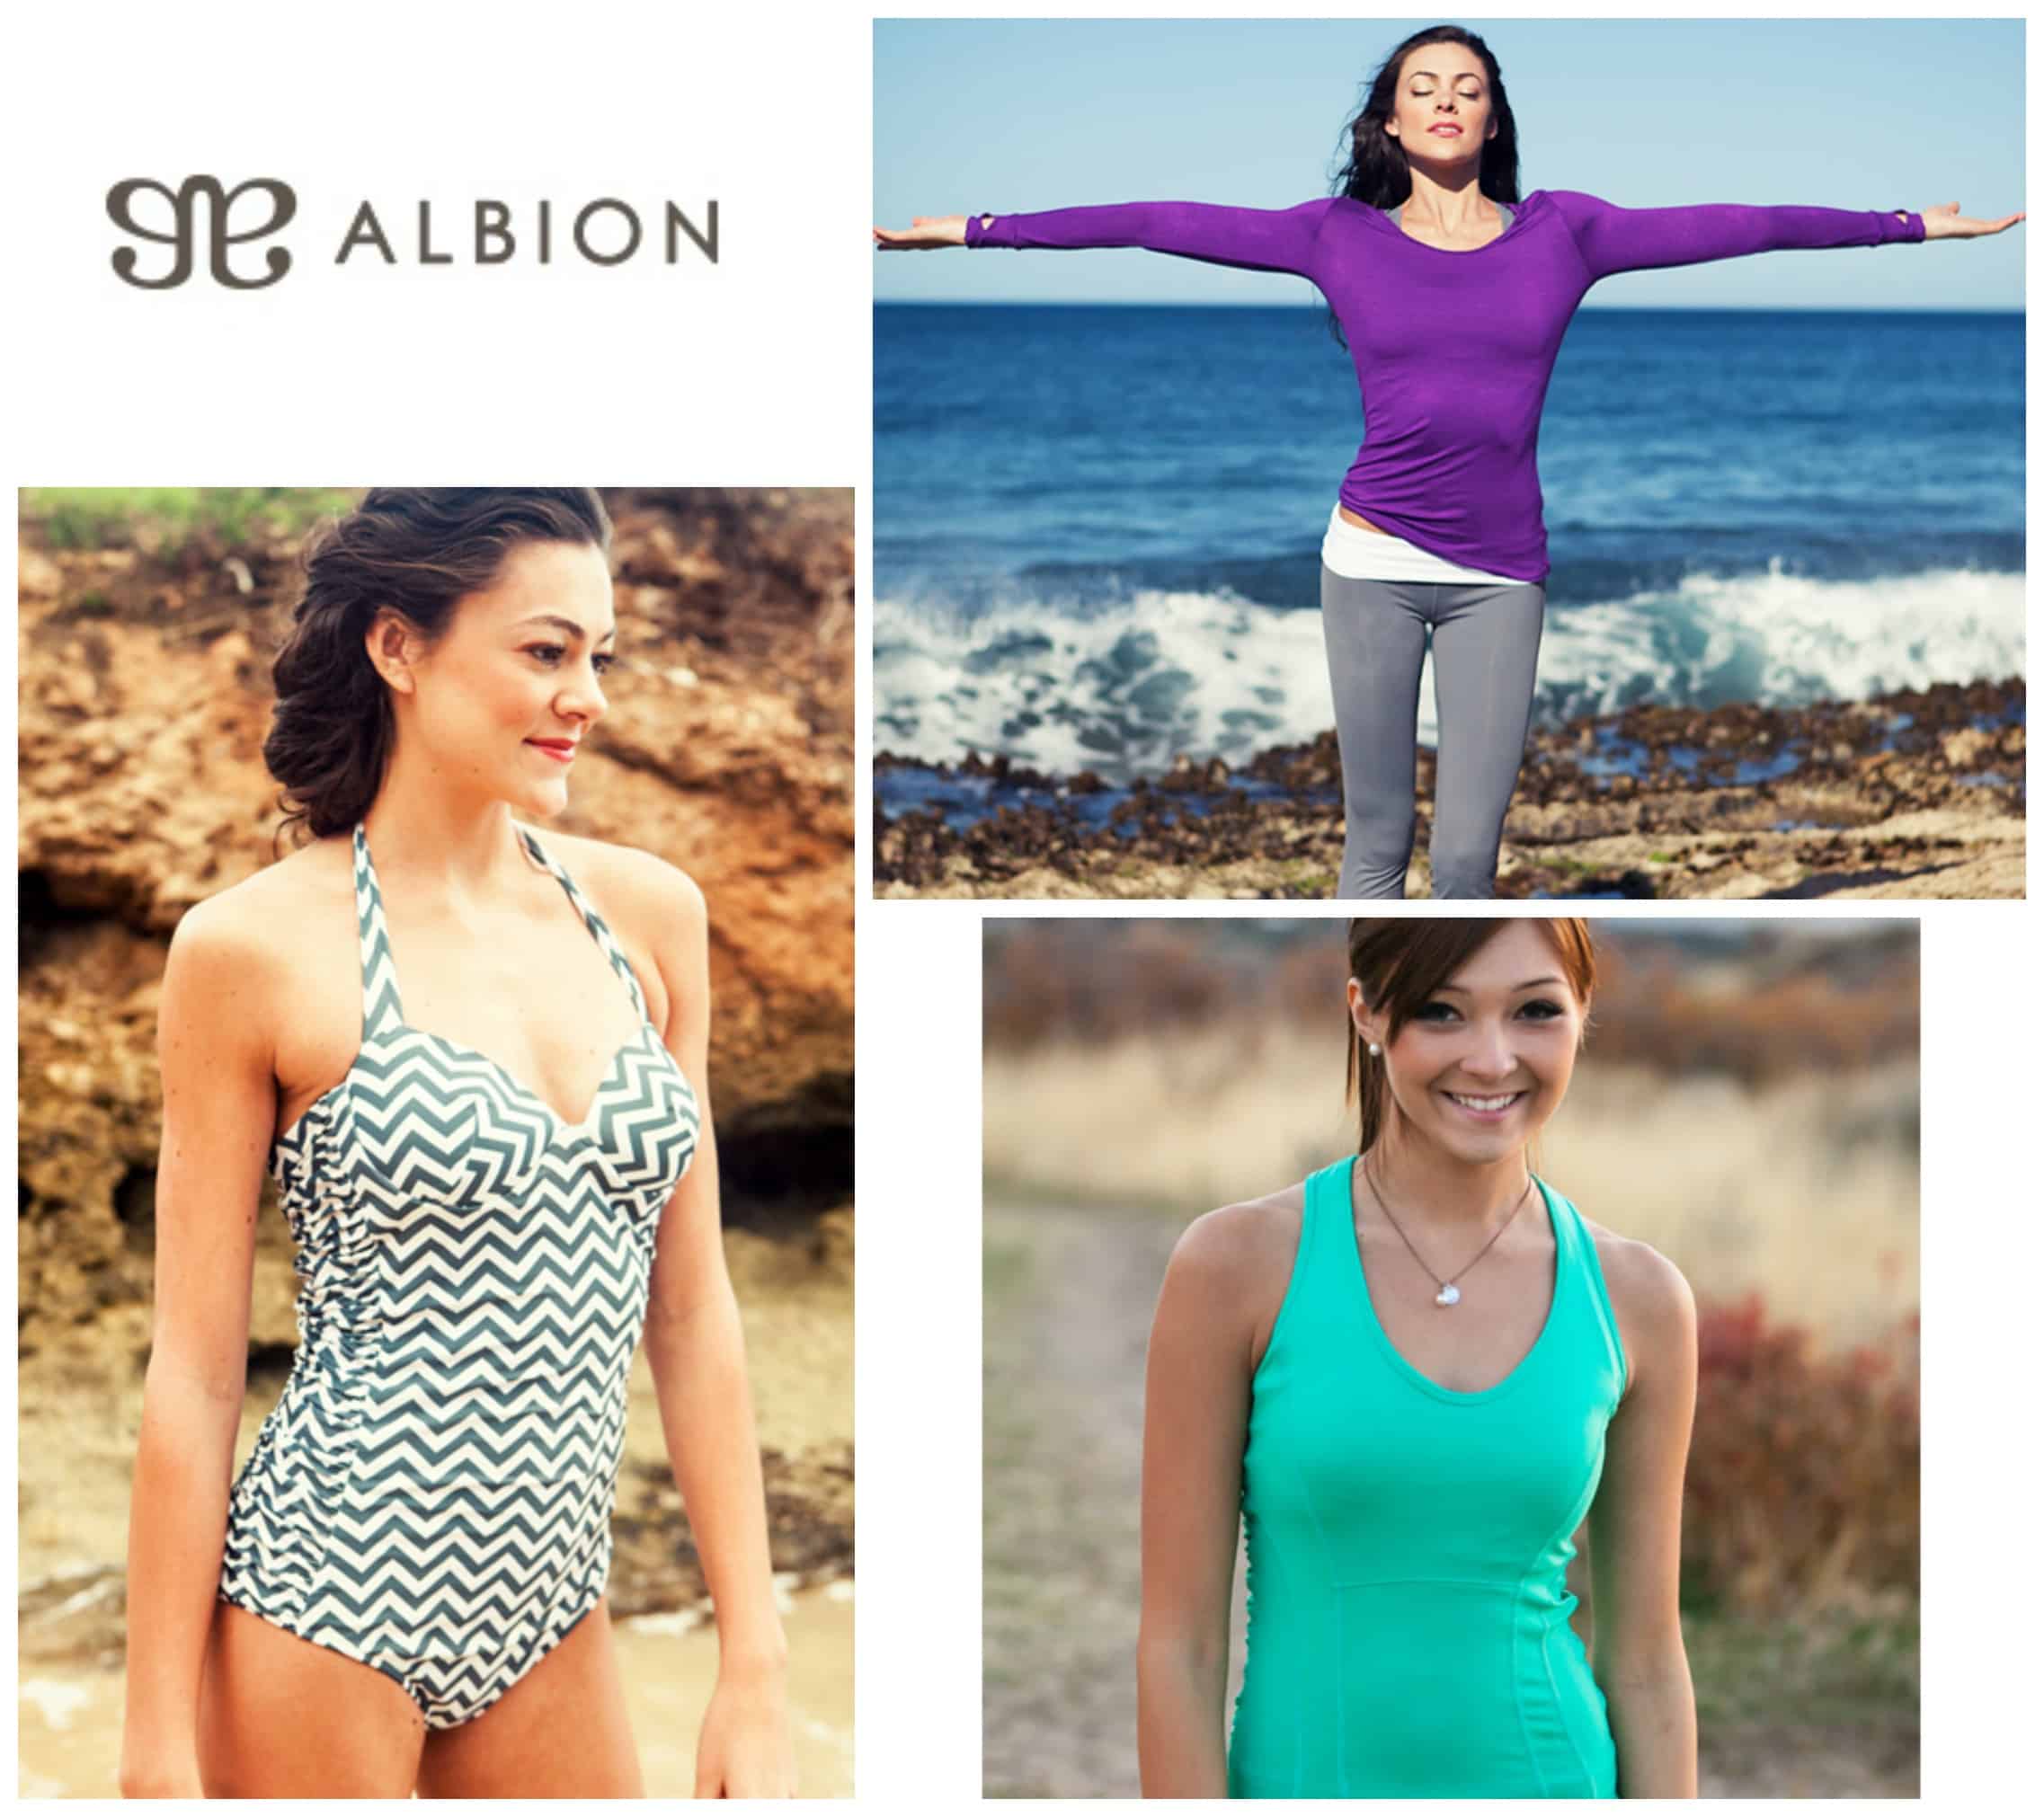 New swimsuit line by Albion Fit